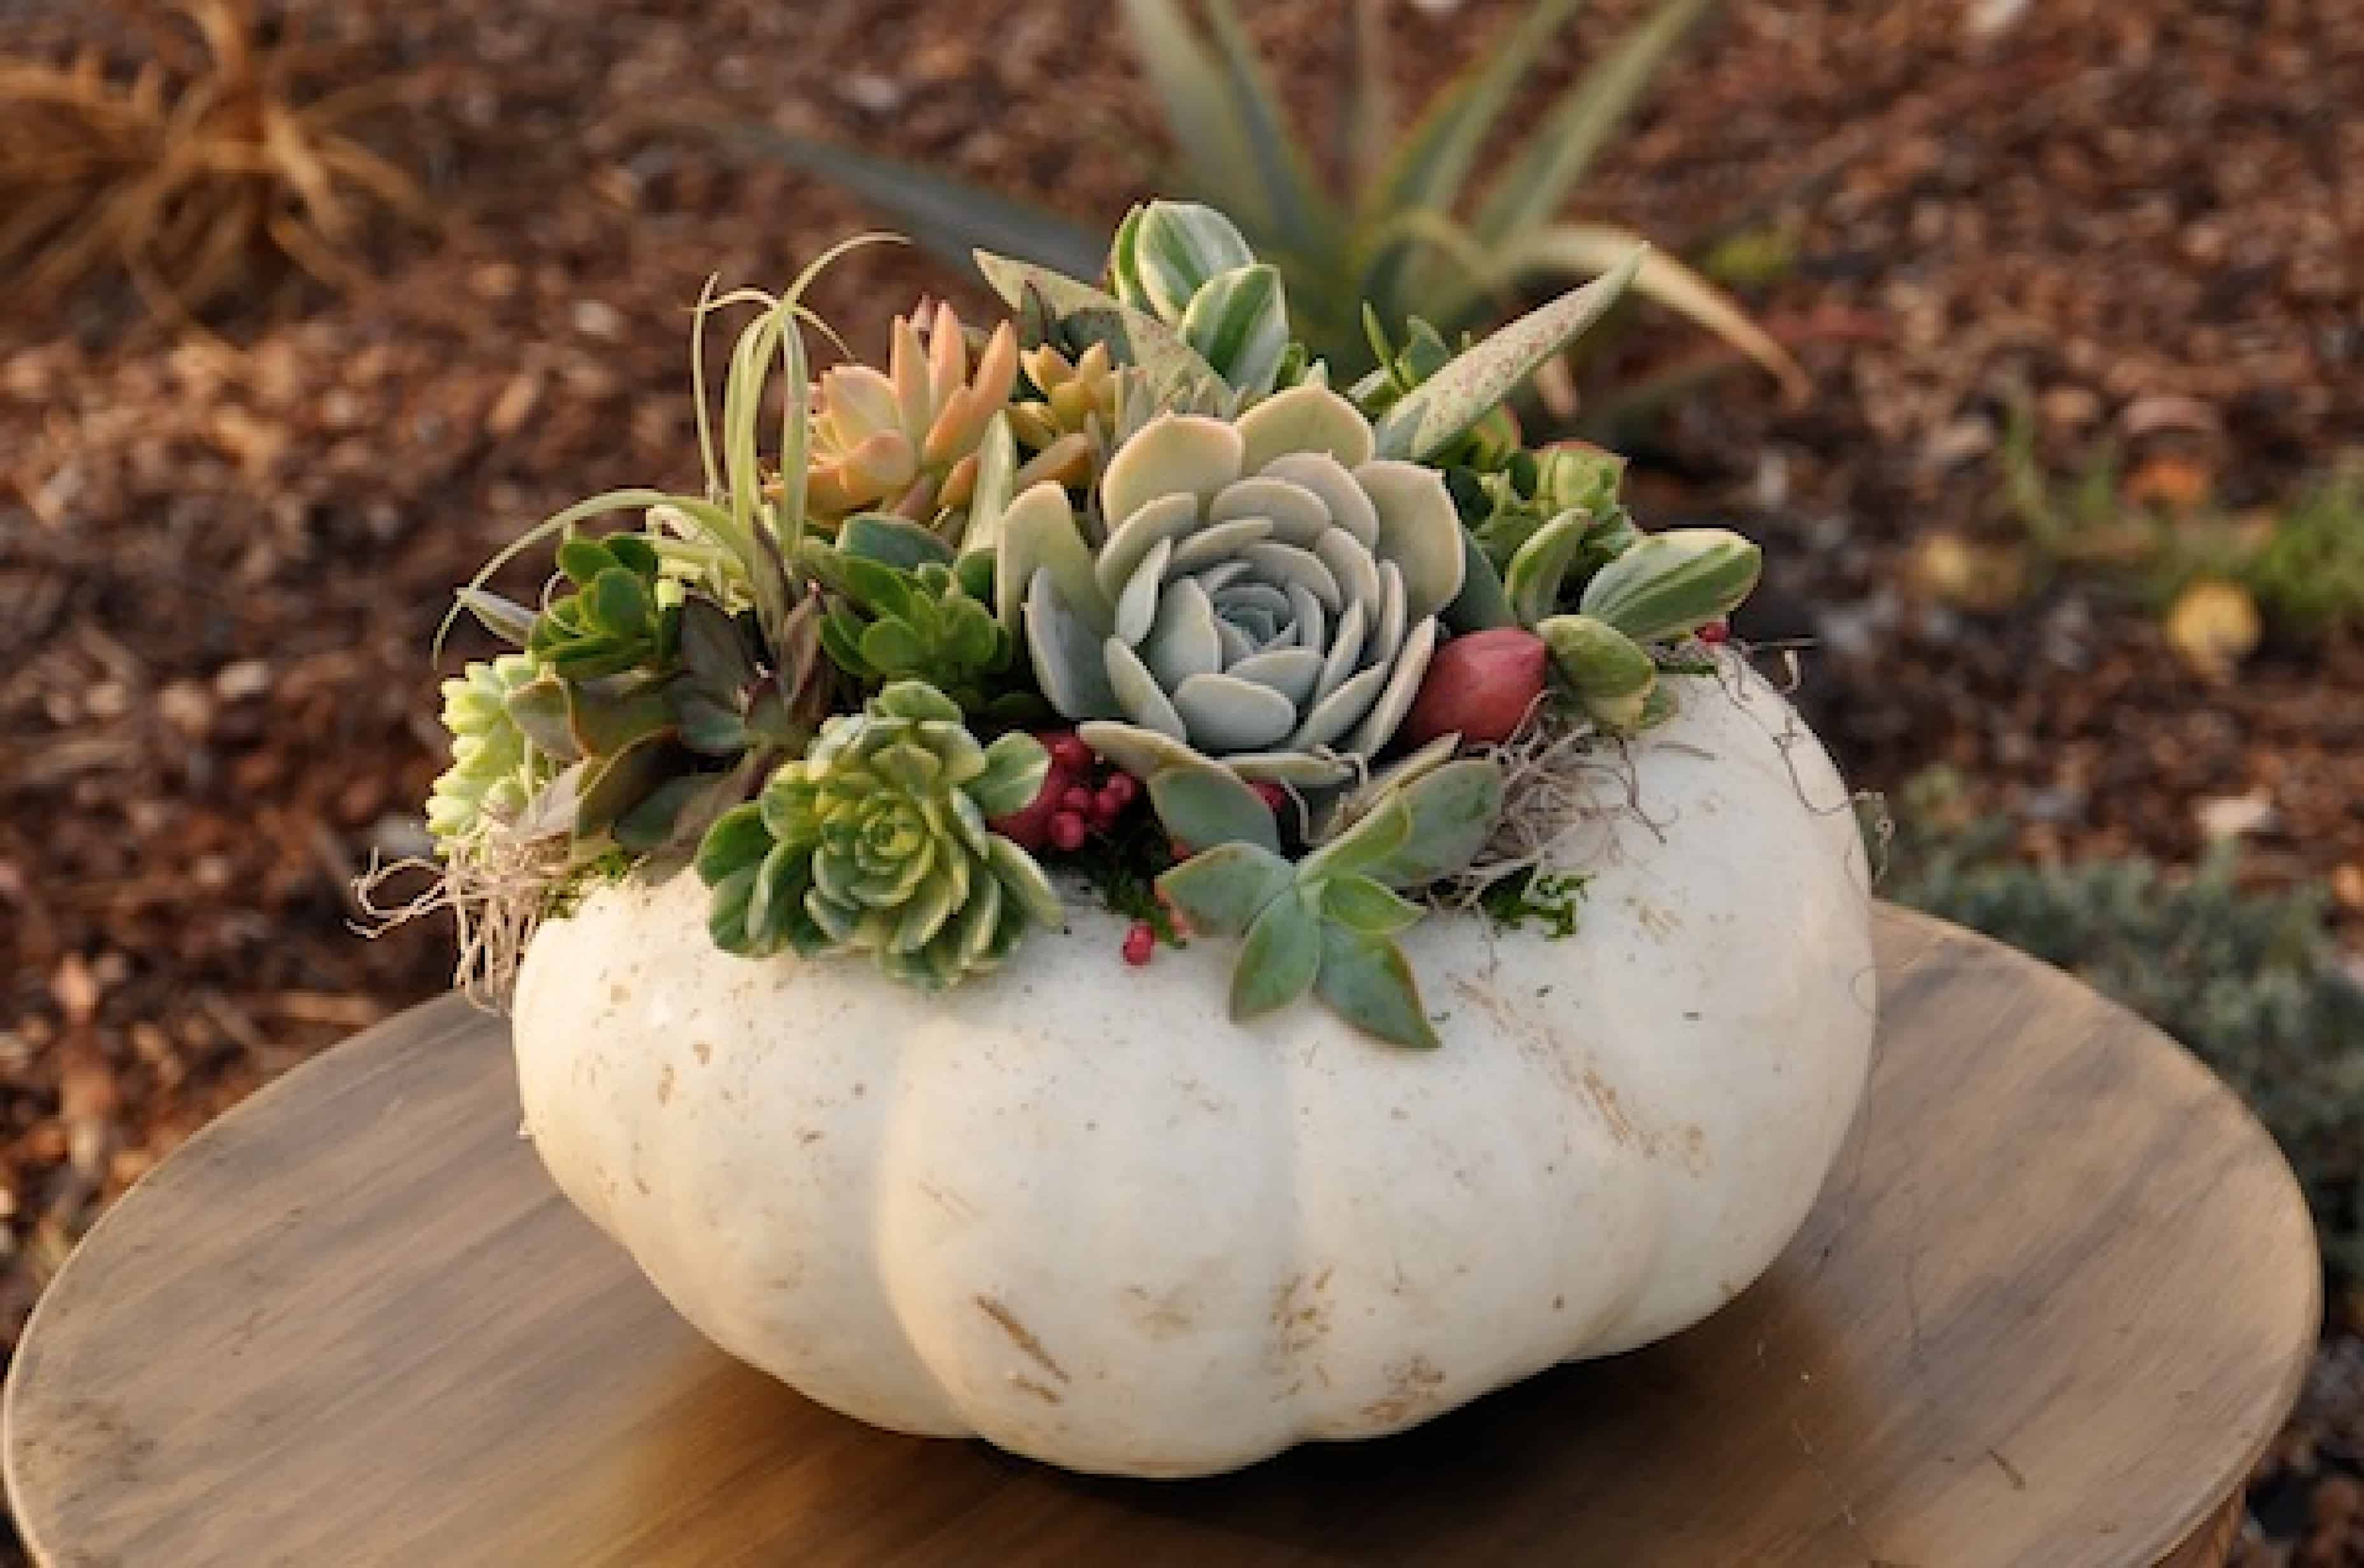 Creating a pumpkin harvest can make your entire space appear more natural and organic all at once.